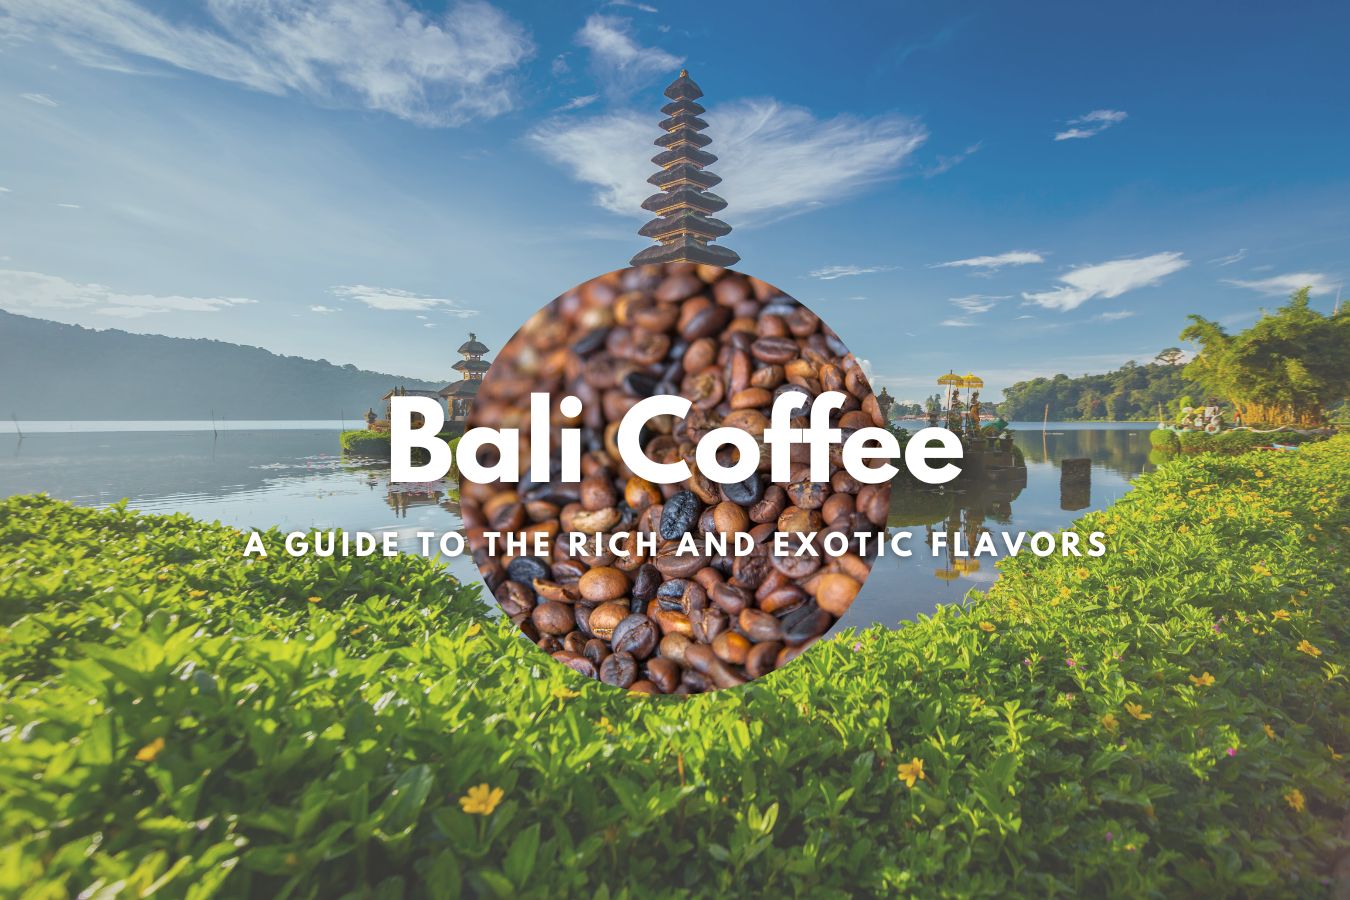 Bali Coffee A Guide to the Rich and Exotic Flavors